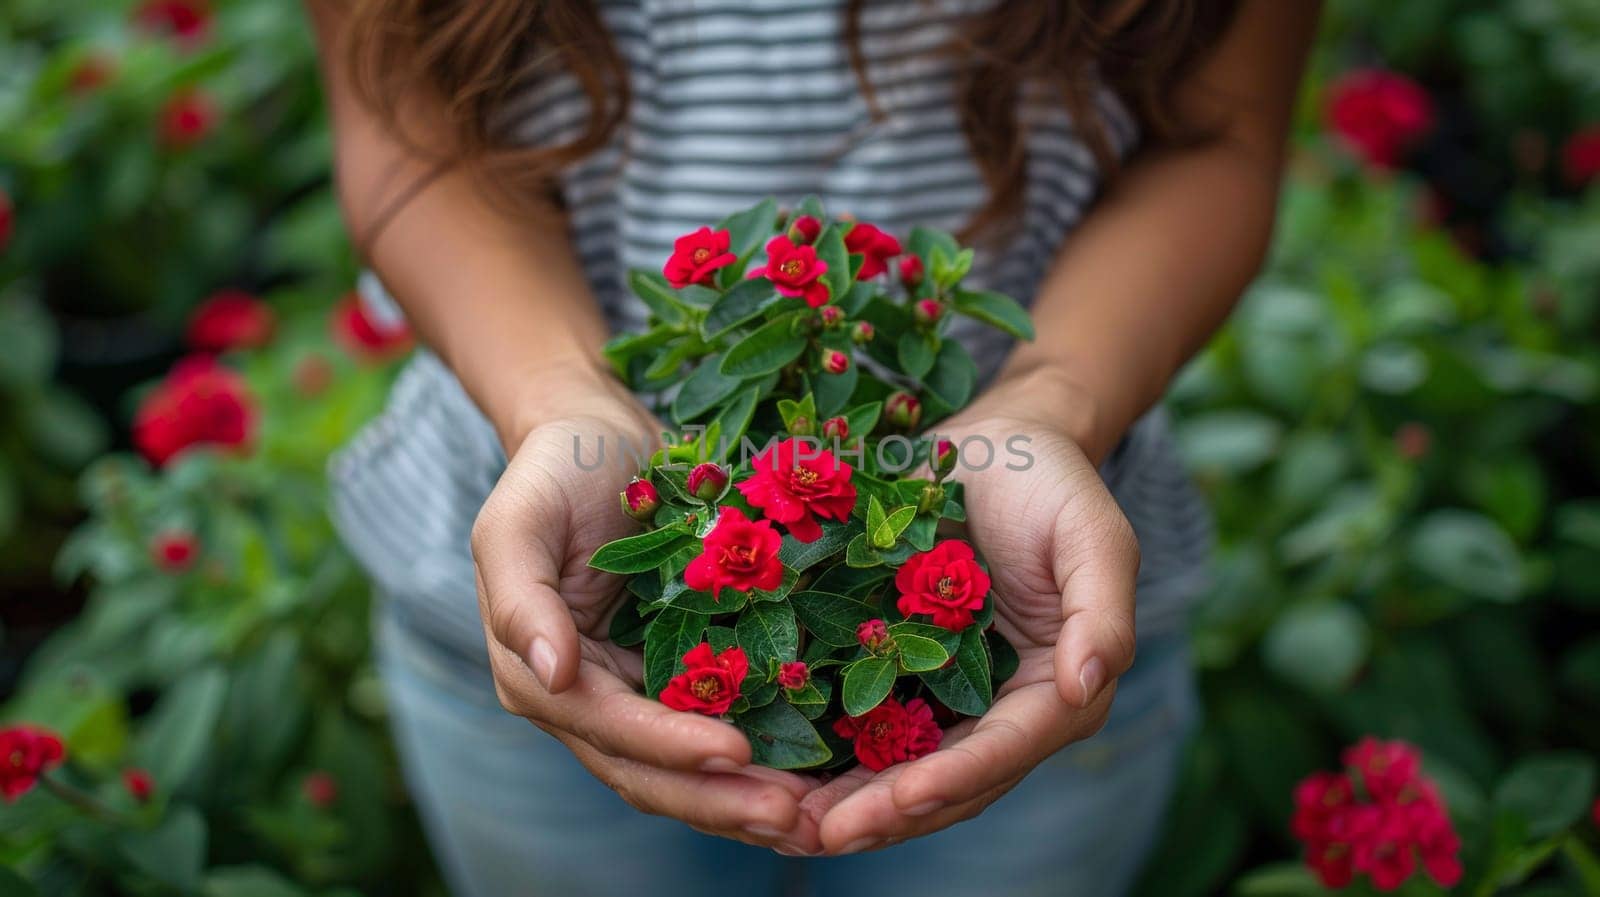 A woman holding a bunch of red flowers in her hands